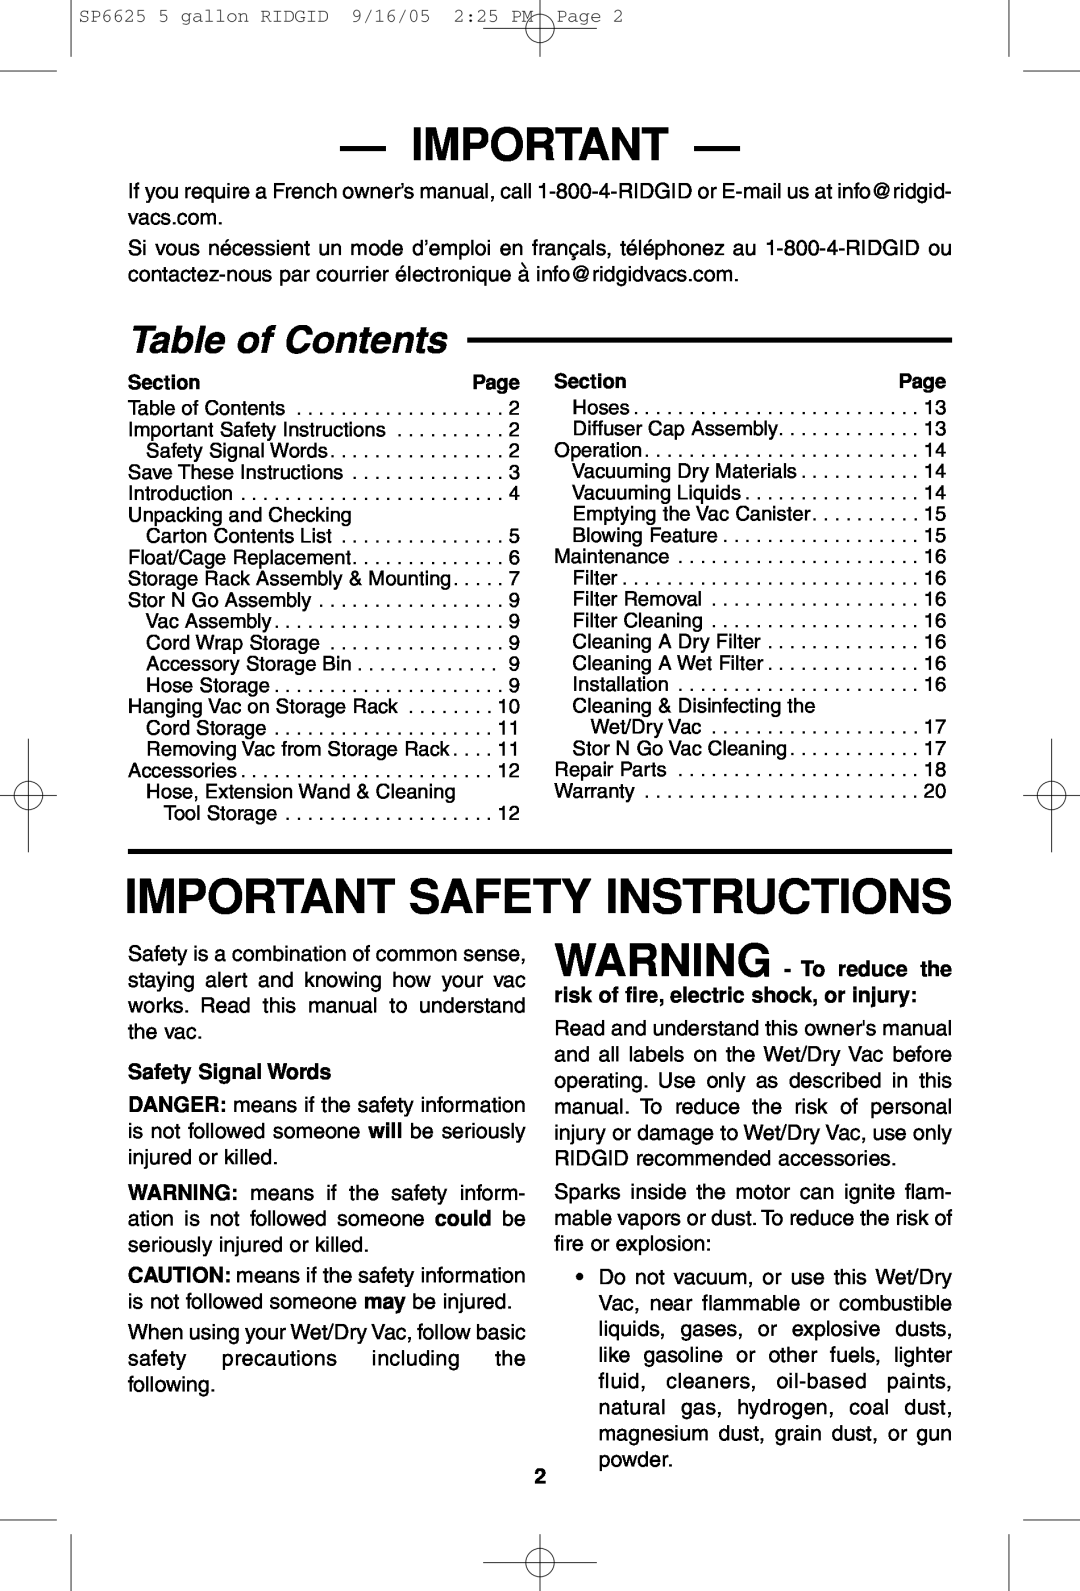 RIDGID WD55000 owner manual Table of Contents, Important Safety Instructions 